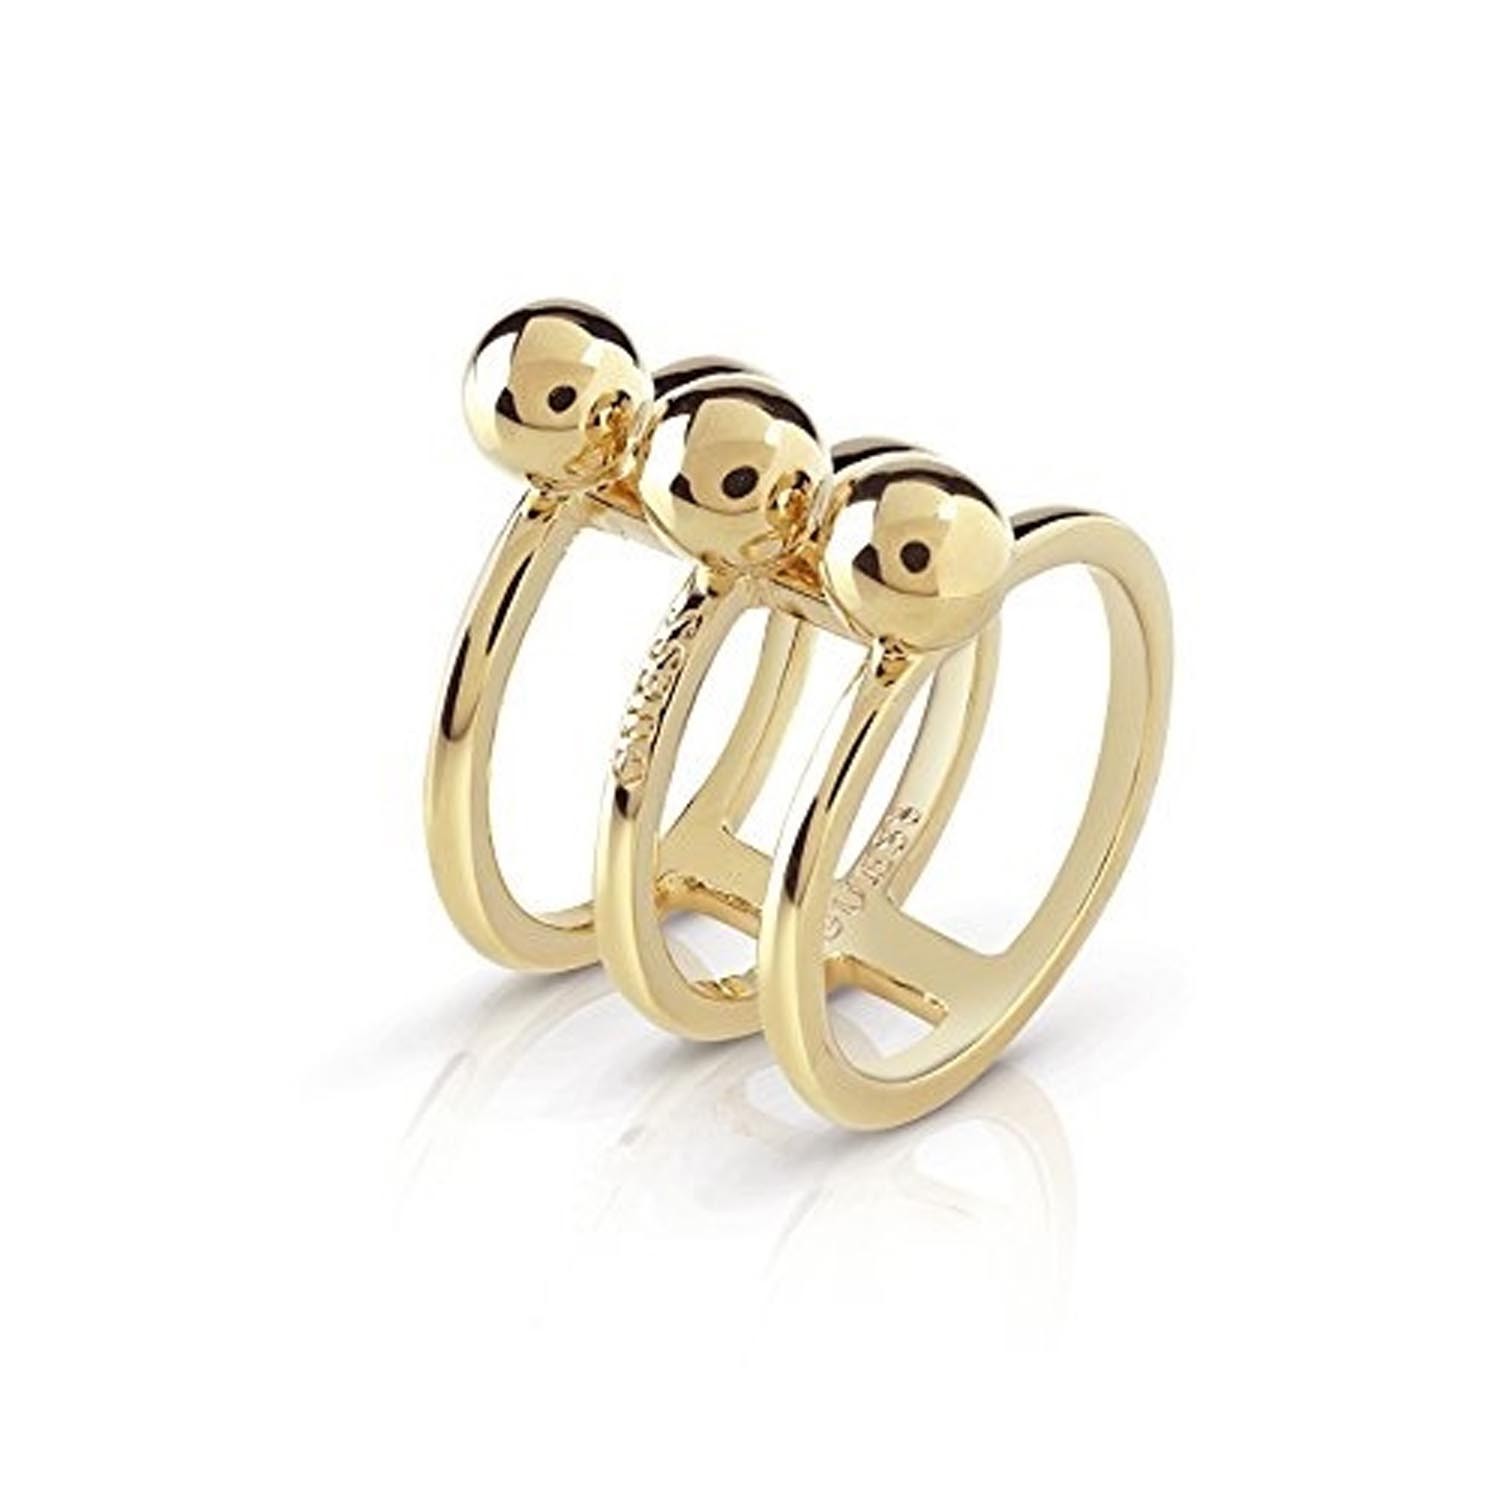 Tranen Chirurgie Spoedig Guess Women's Rings Guess Influencer Golden Women's Size 14 Ring with  3-Tier Design and Ball Accents 132260 UBR85016-54 | Comprar Rings Guess  Influencer Golden Women's Size 14 Ring with 3-Tier Design and